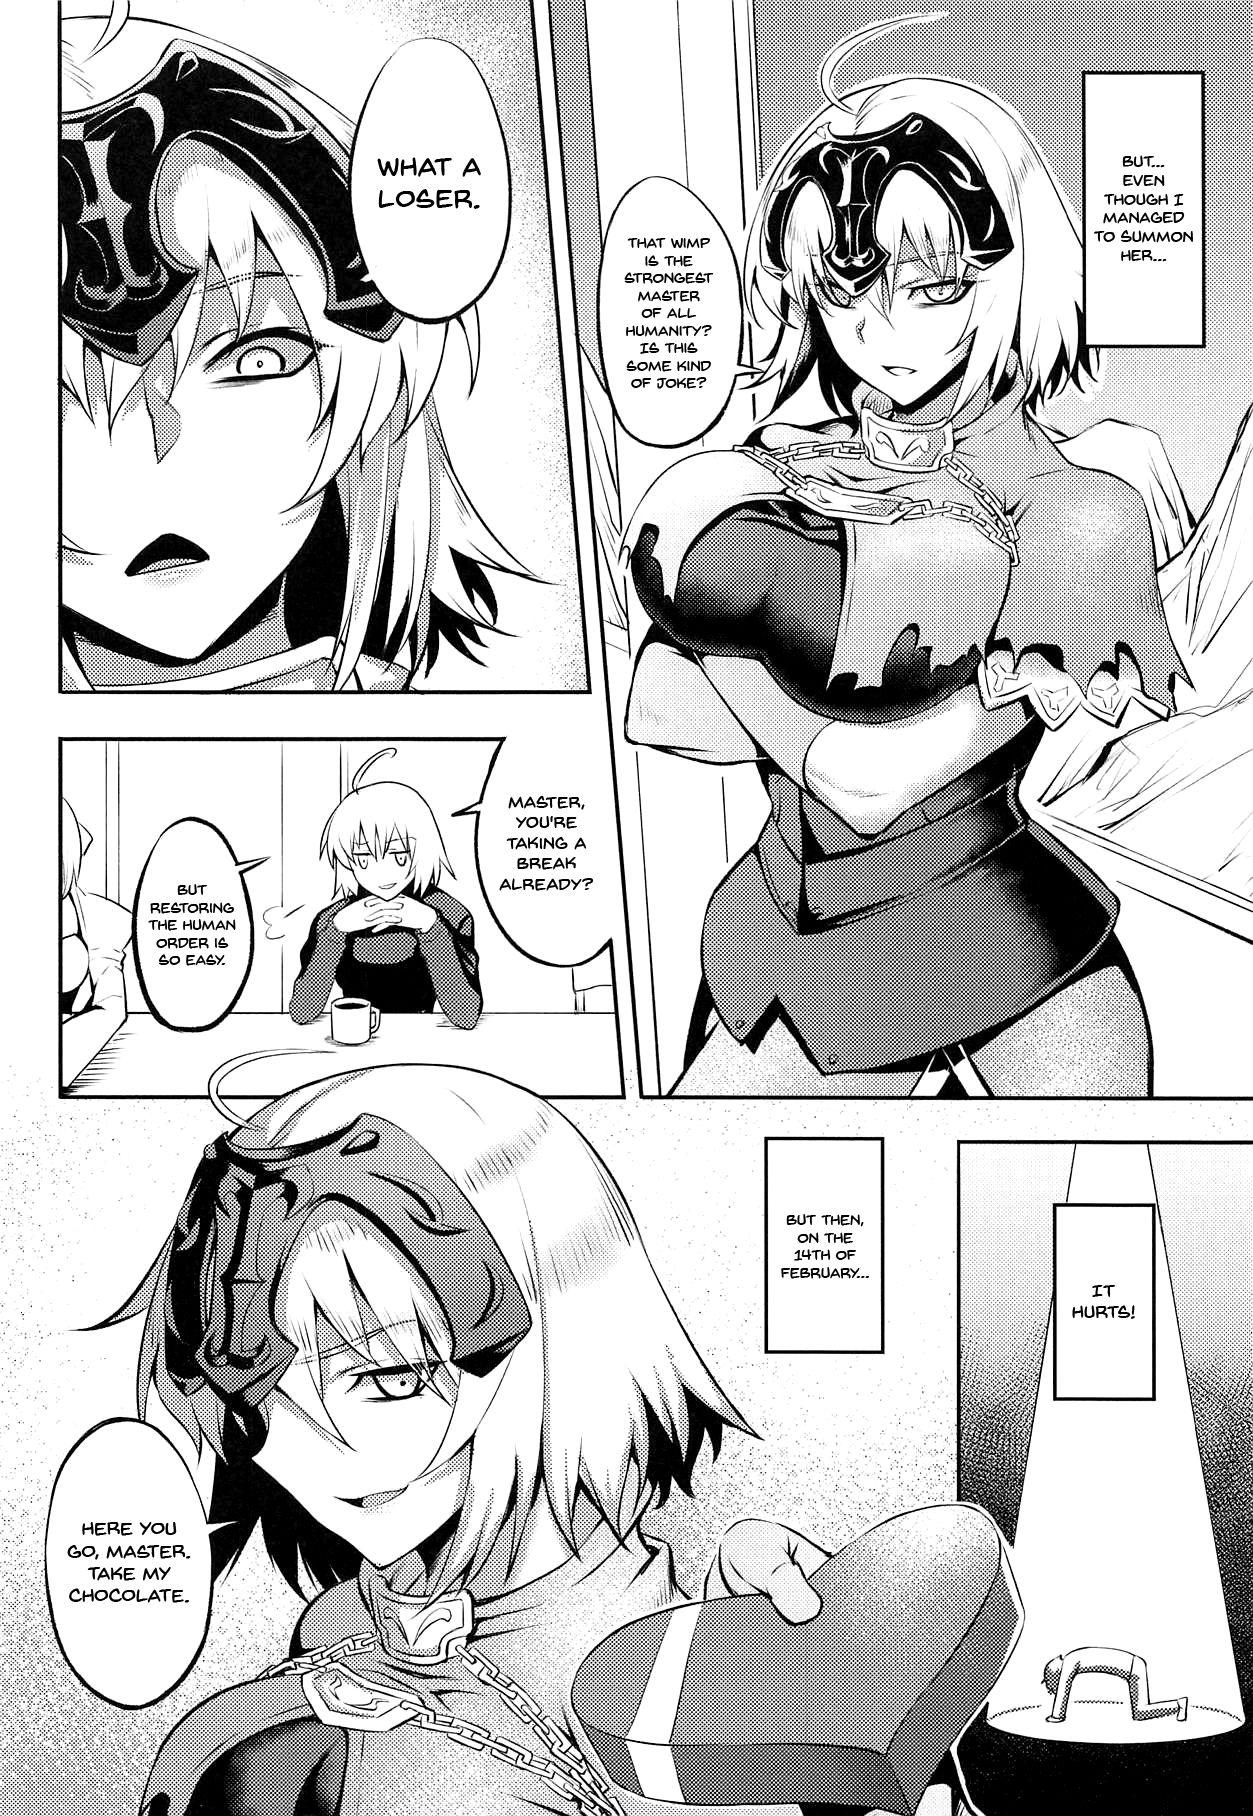 Huge Sugao no Mama no Kimi de Ite | Together With You Showing Her True Face - Fate grand order Trans - Page 4